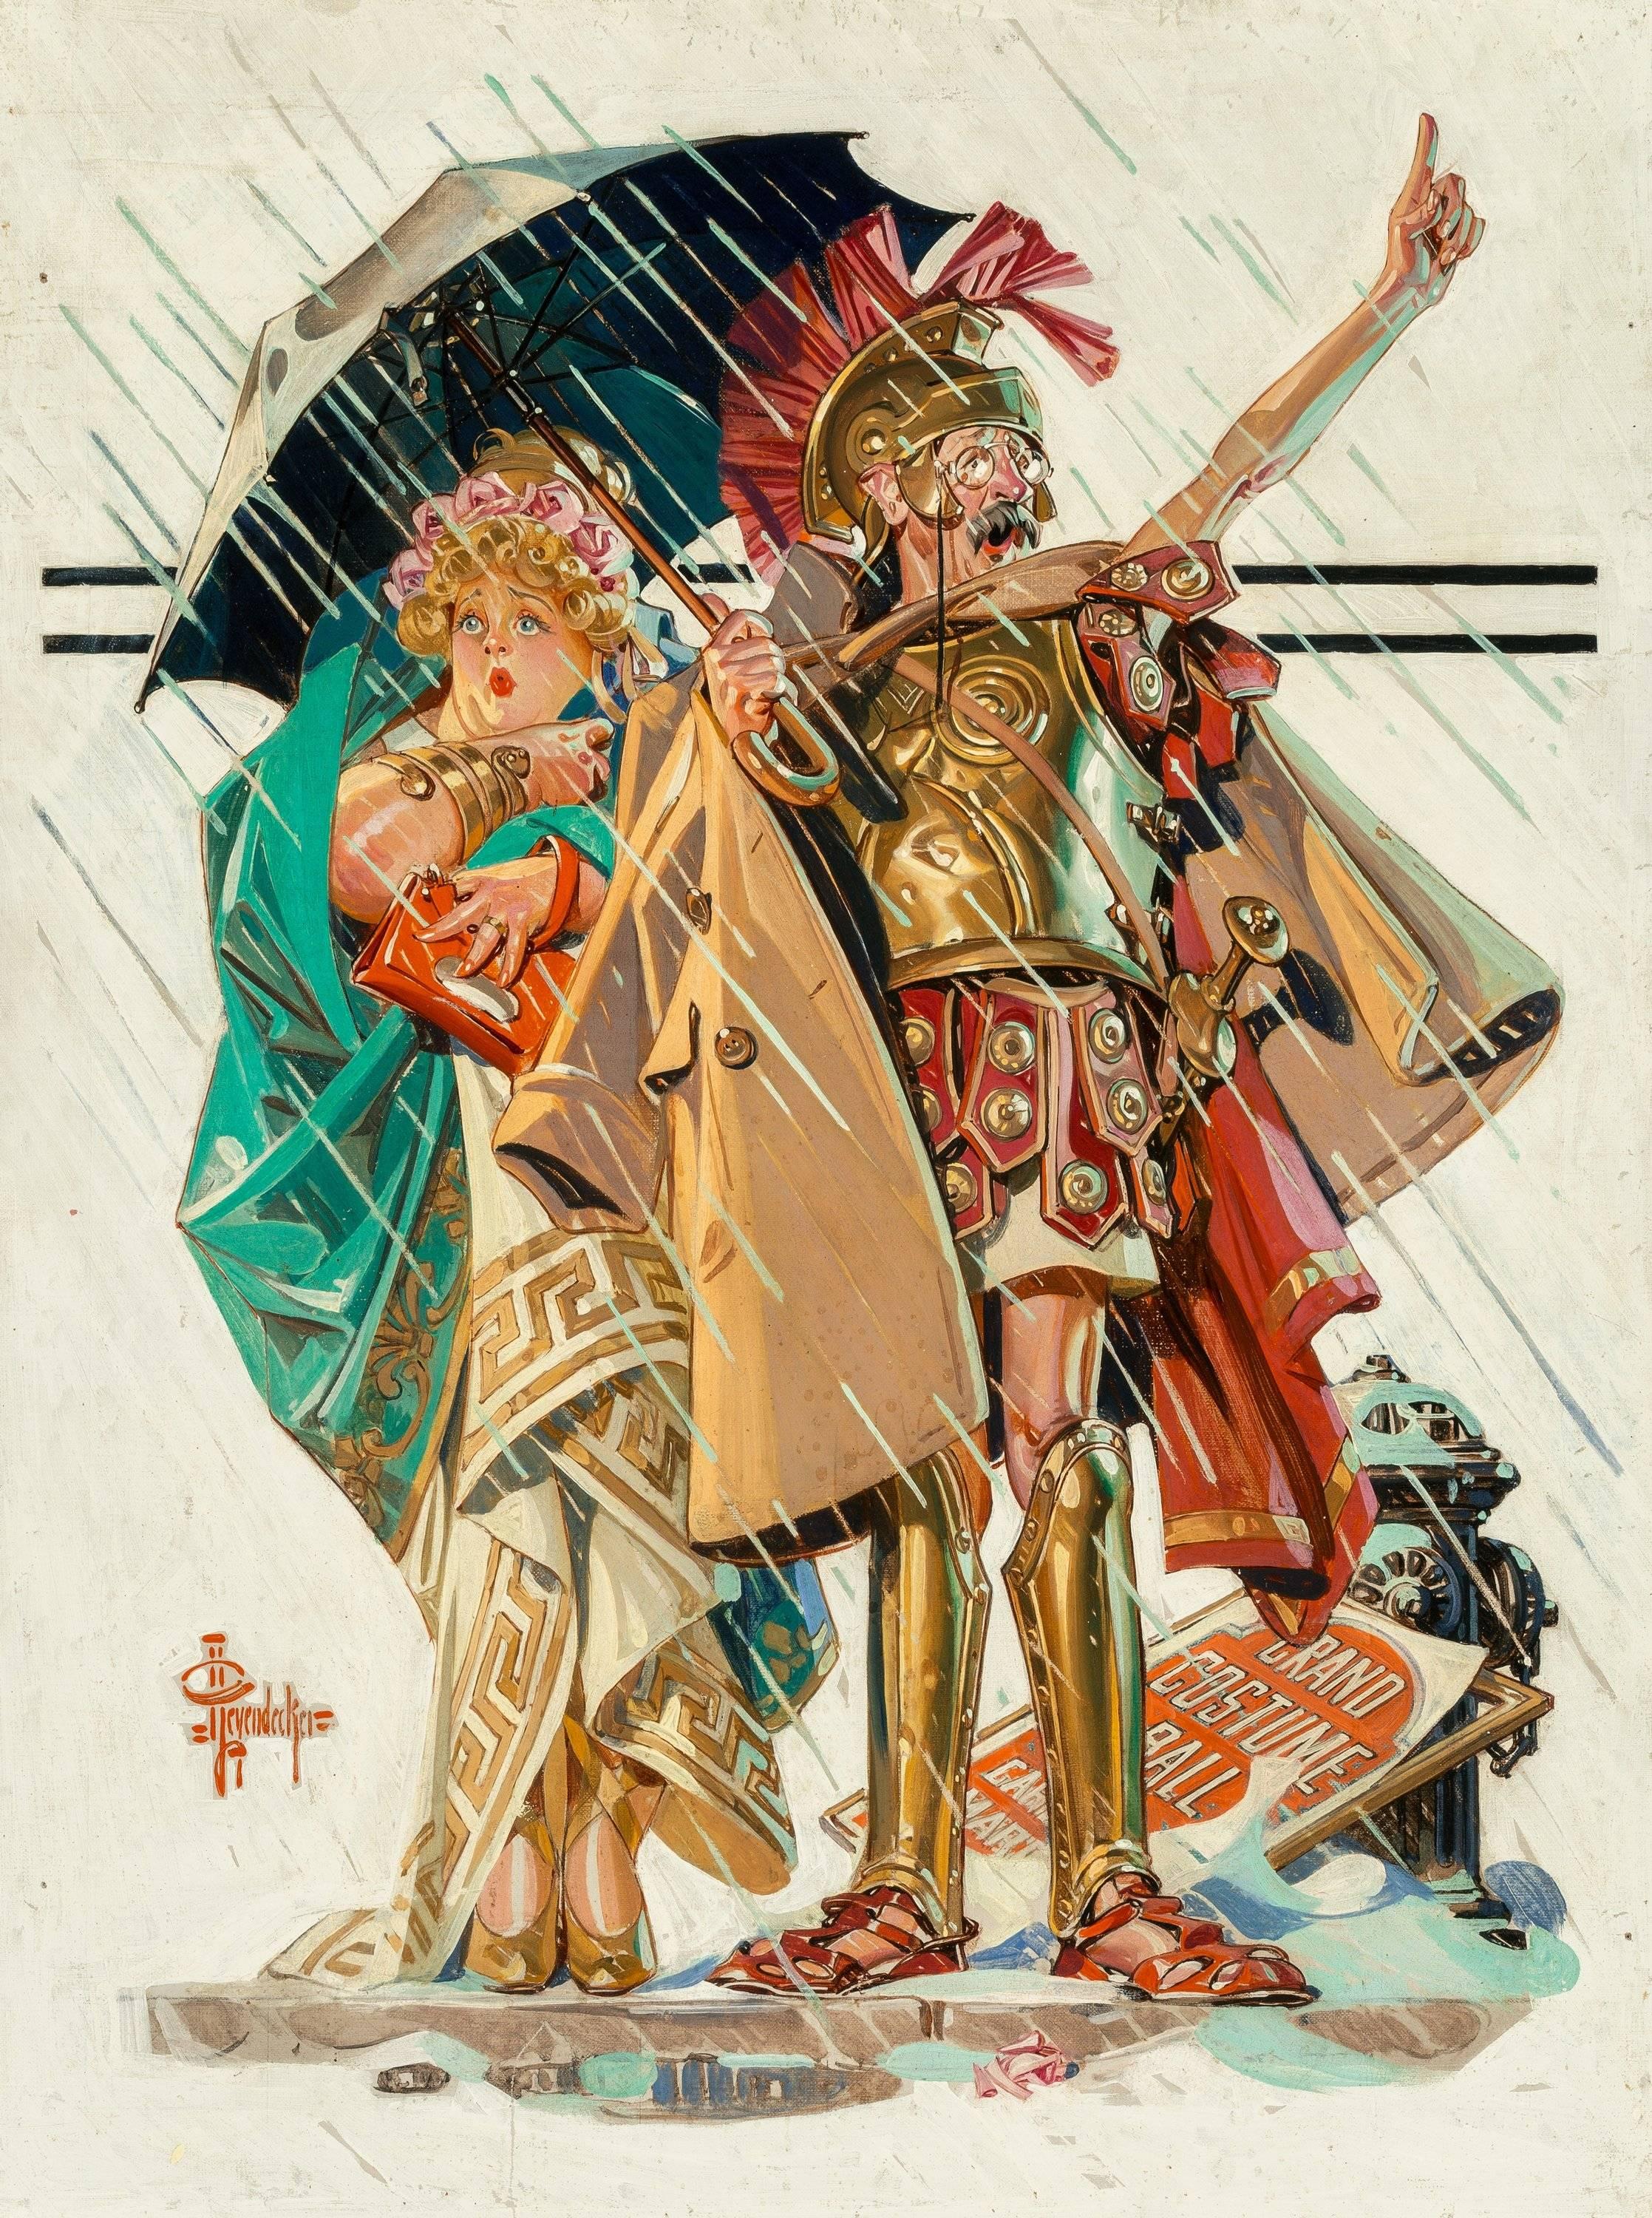 Joseph Christian Leyendecker Figurative Painting - To the Vanquished, Saturday Evening Post Cover, March 10, 1934